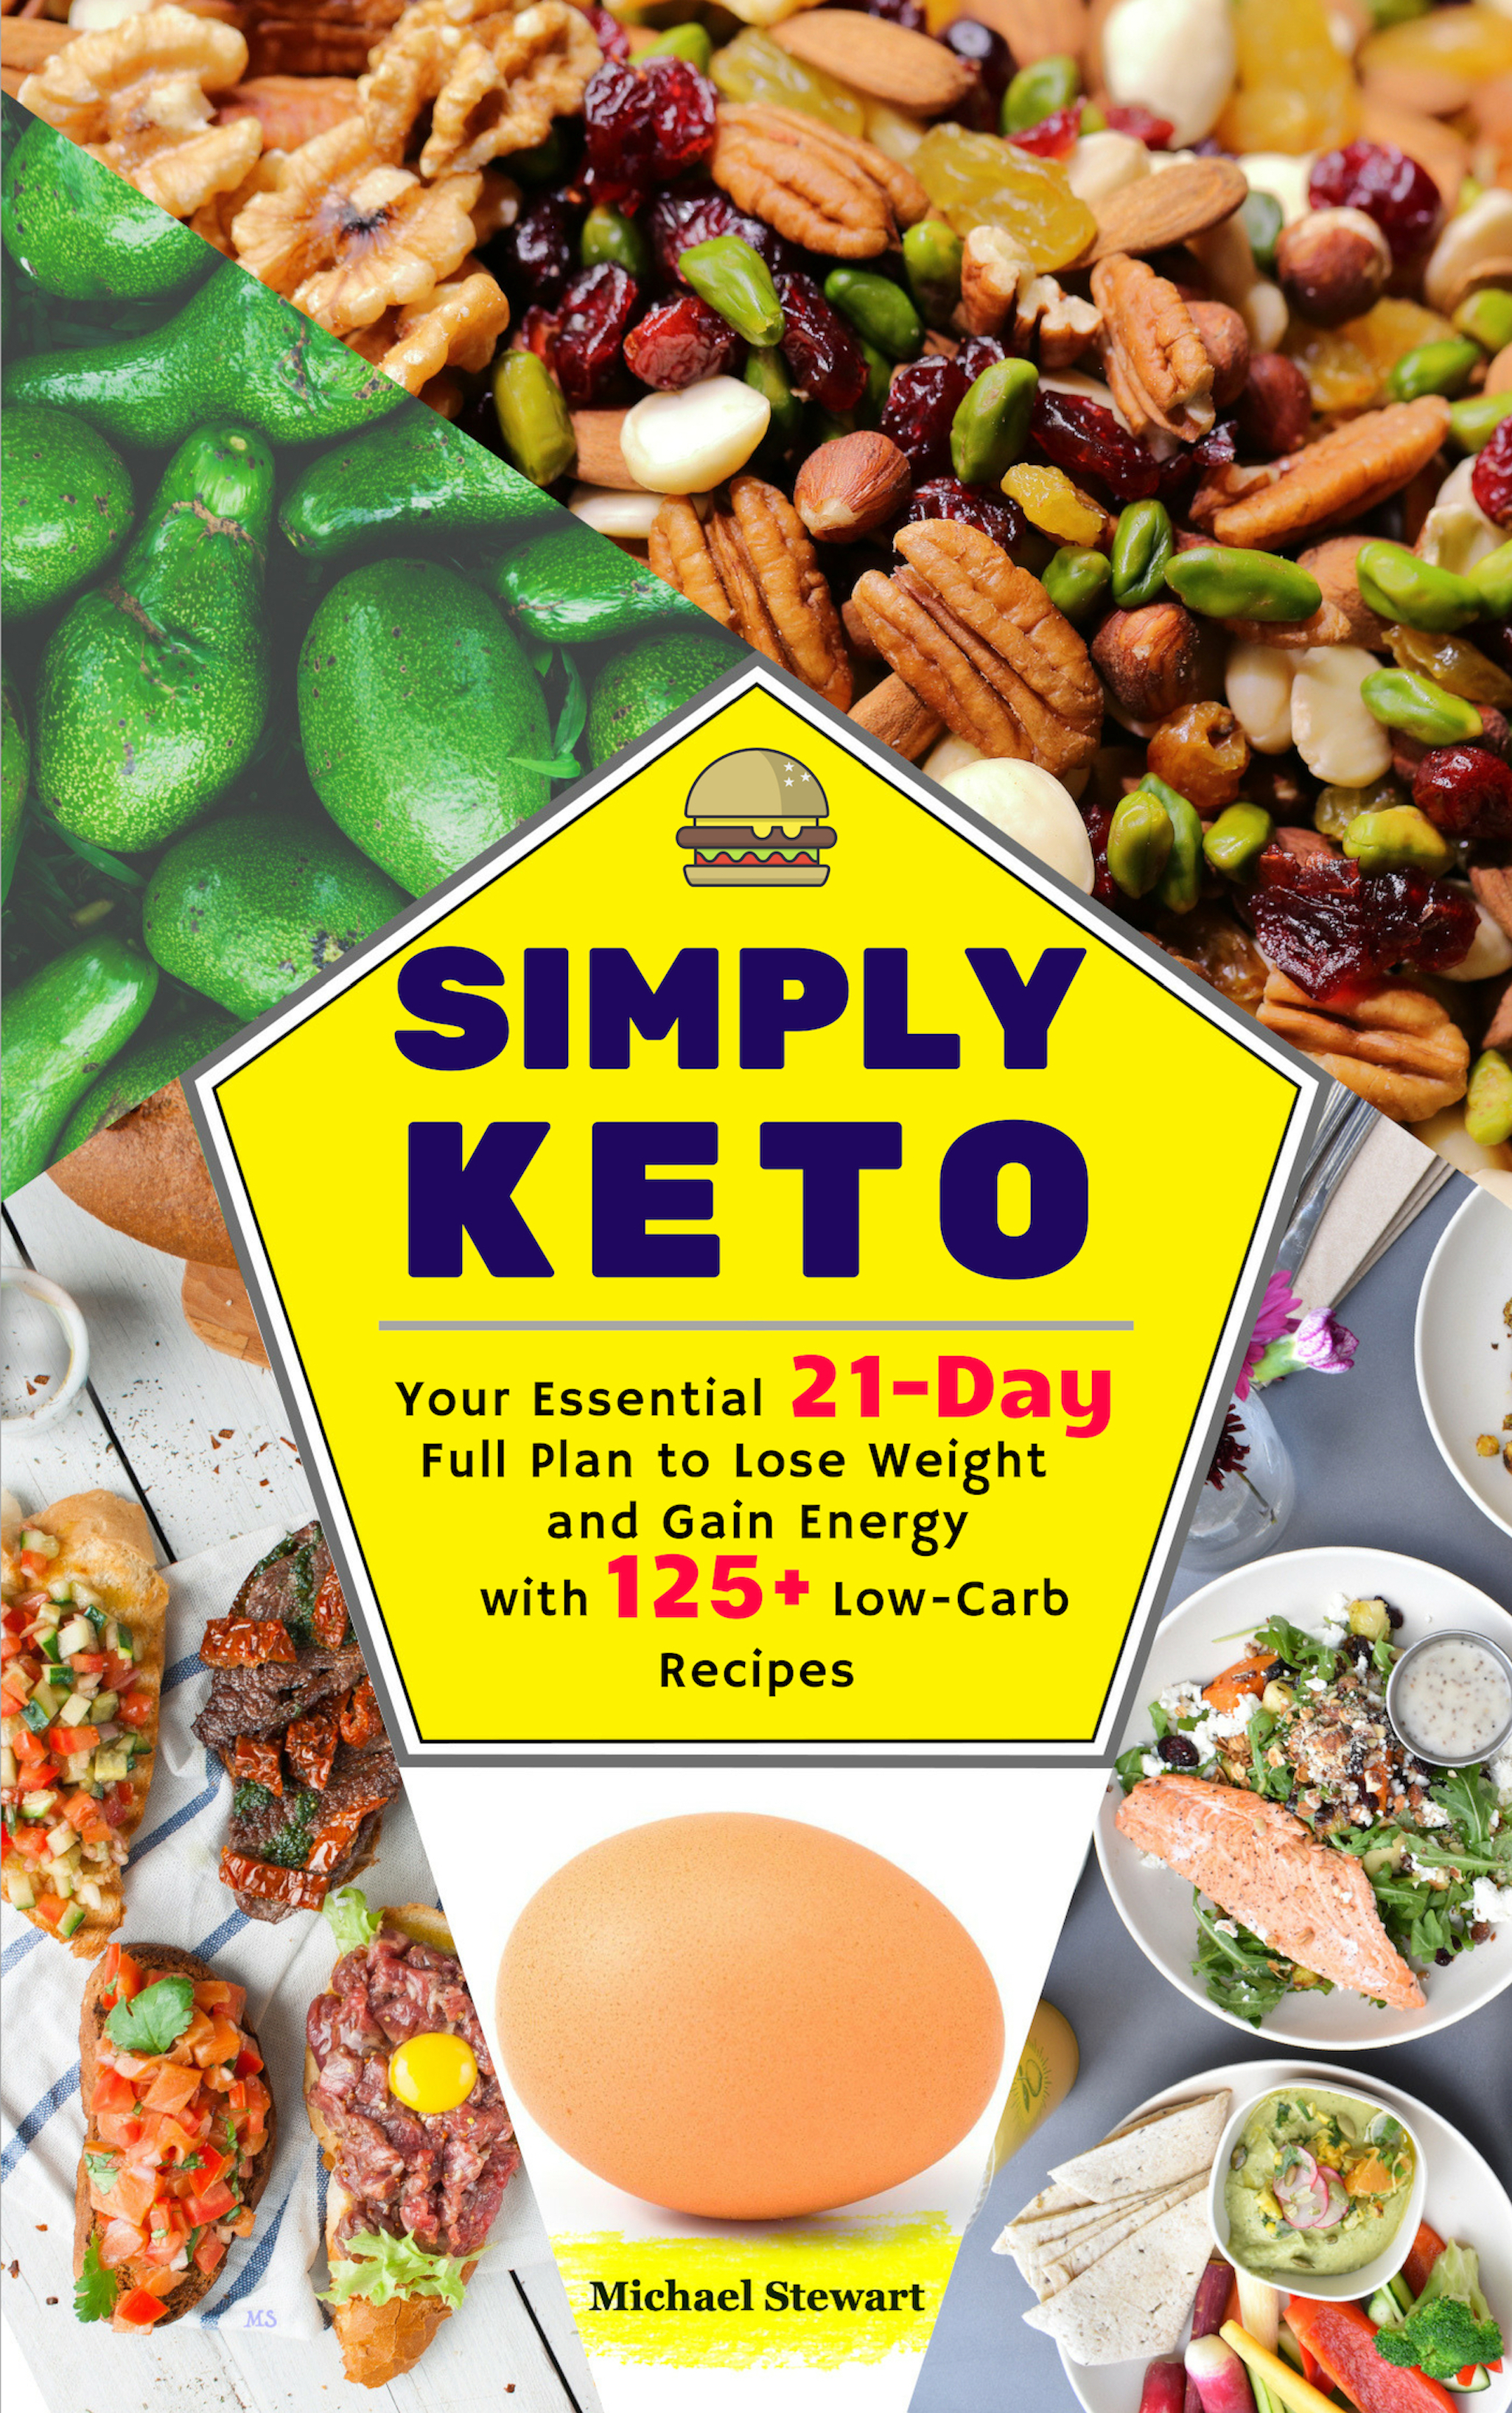 FREE: Simply Keto: Your Essential 21-Day Full Plan to Lose Weight and Gain Energy, with 125+ Low-Carb Recipes by michael stewart